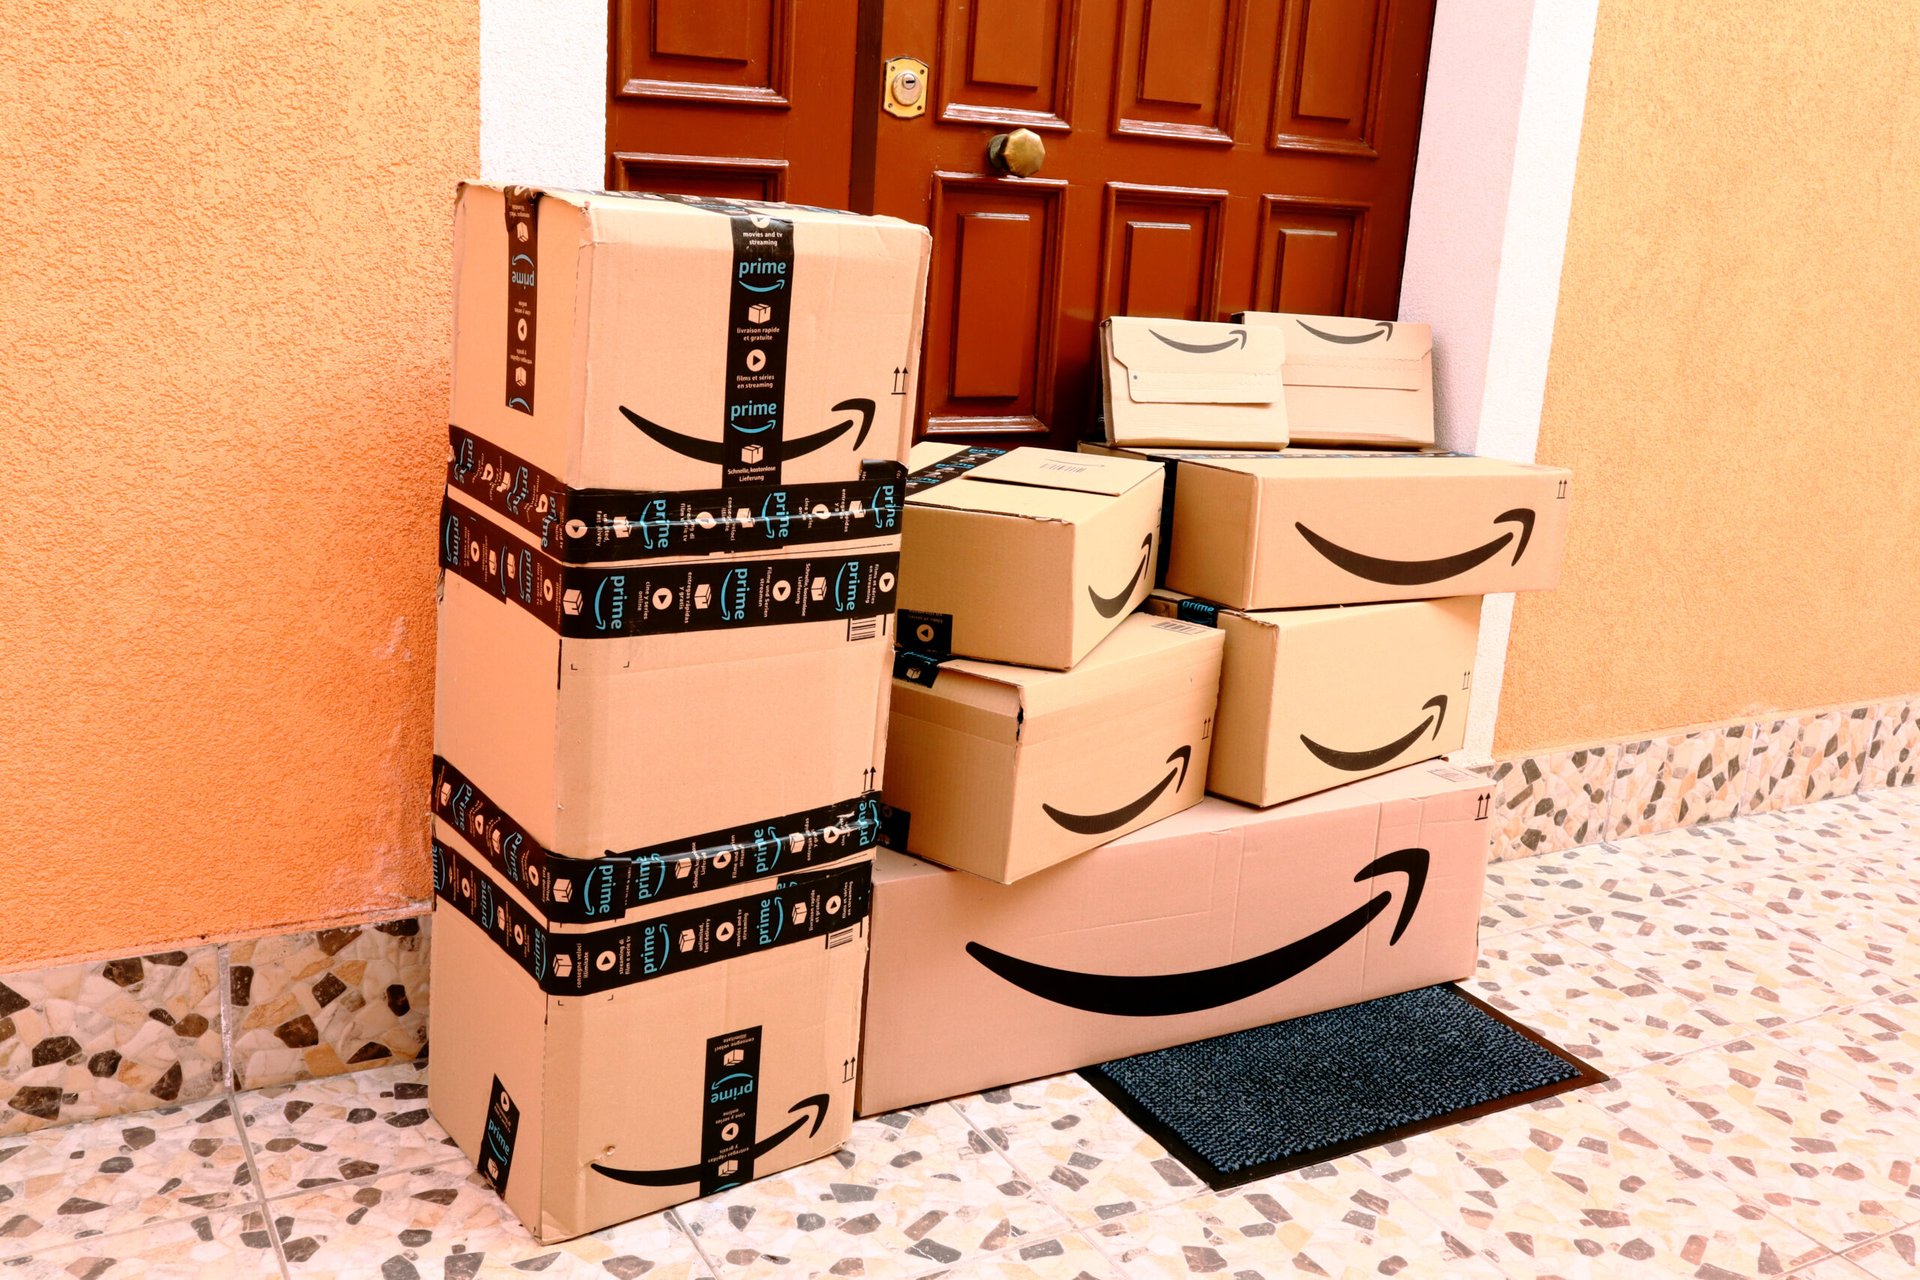 Amazon boxes at a front door